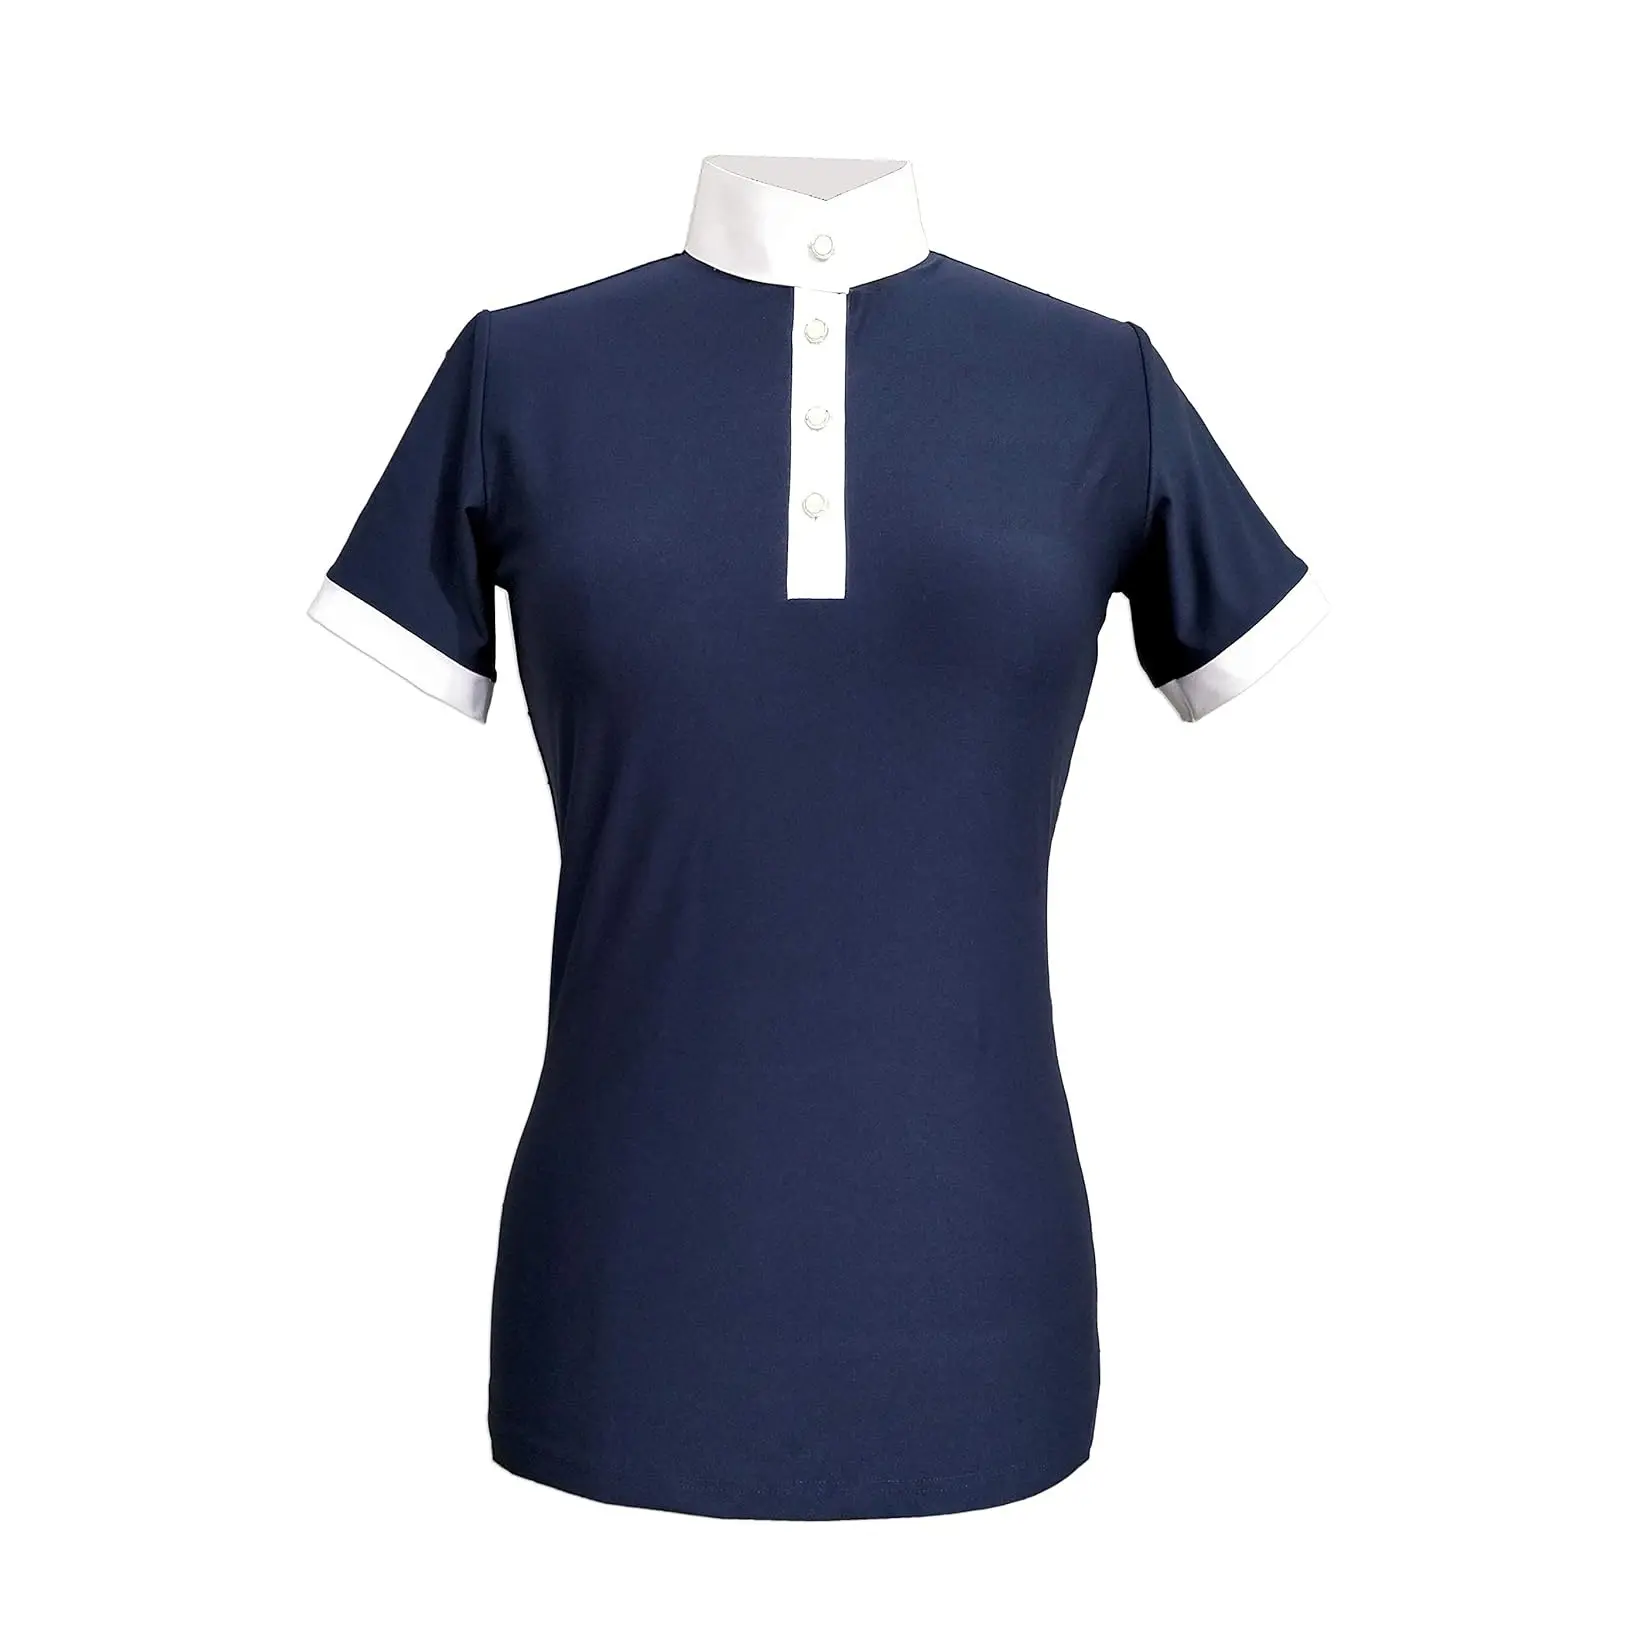 Direct Factory Supply Women's Quick Dry Short Sleeve Rider Sport Sun Shirt Available at Bulk Price from India